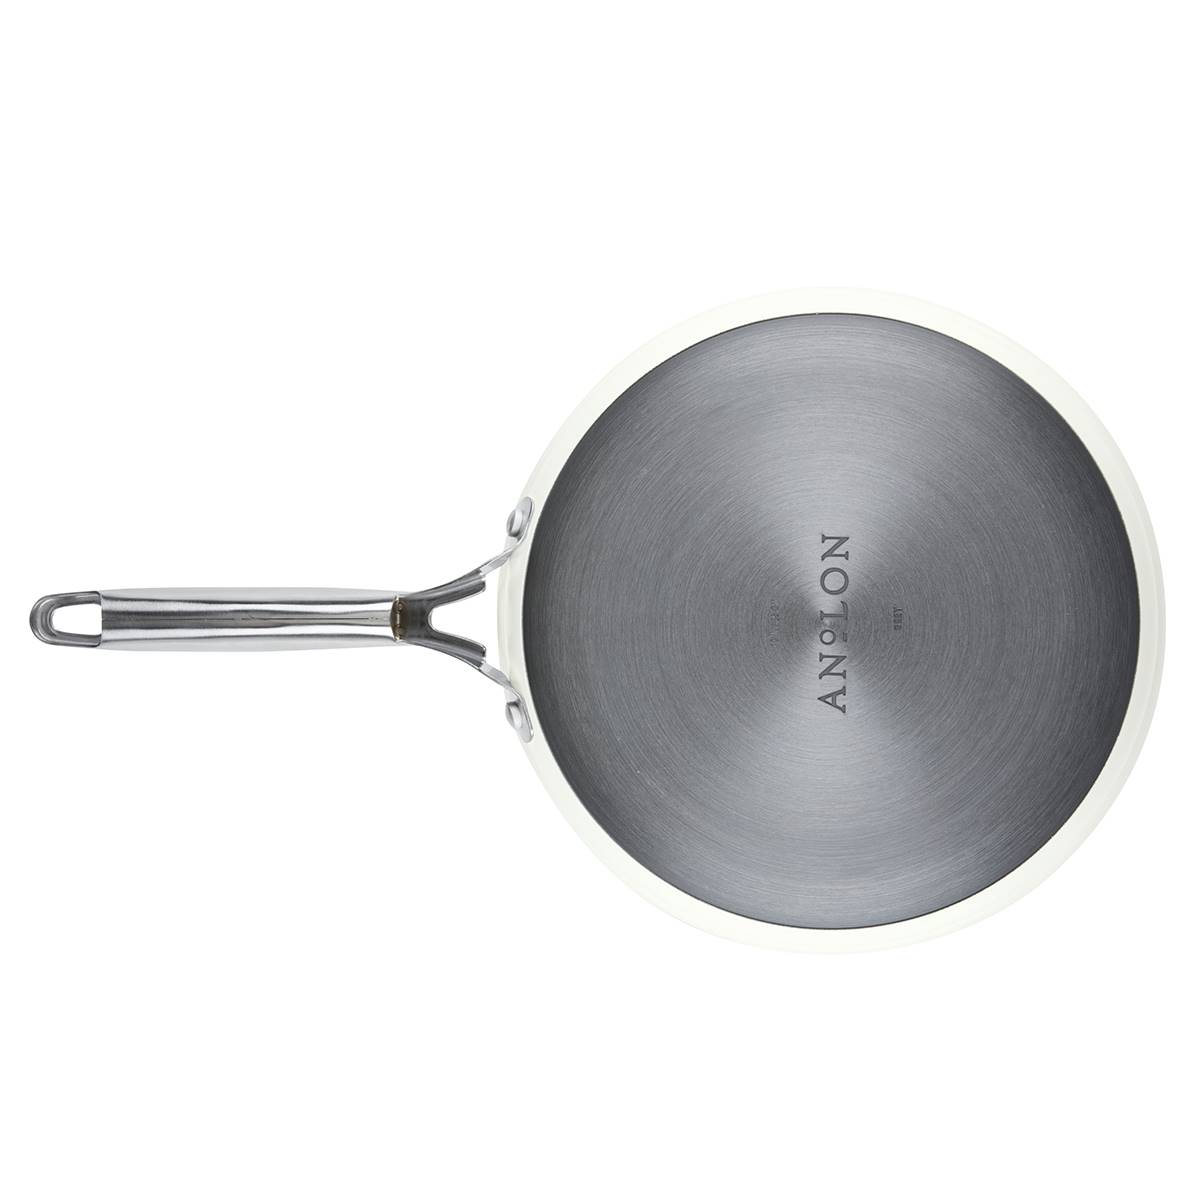 Anolon(R) Achieve Hard Anodized Nonstick 10in. Frying Pan